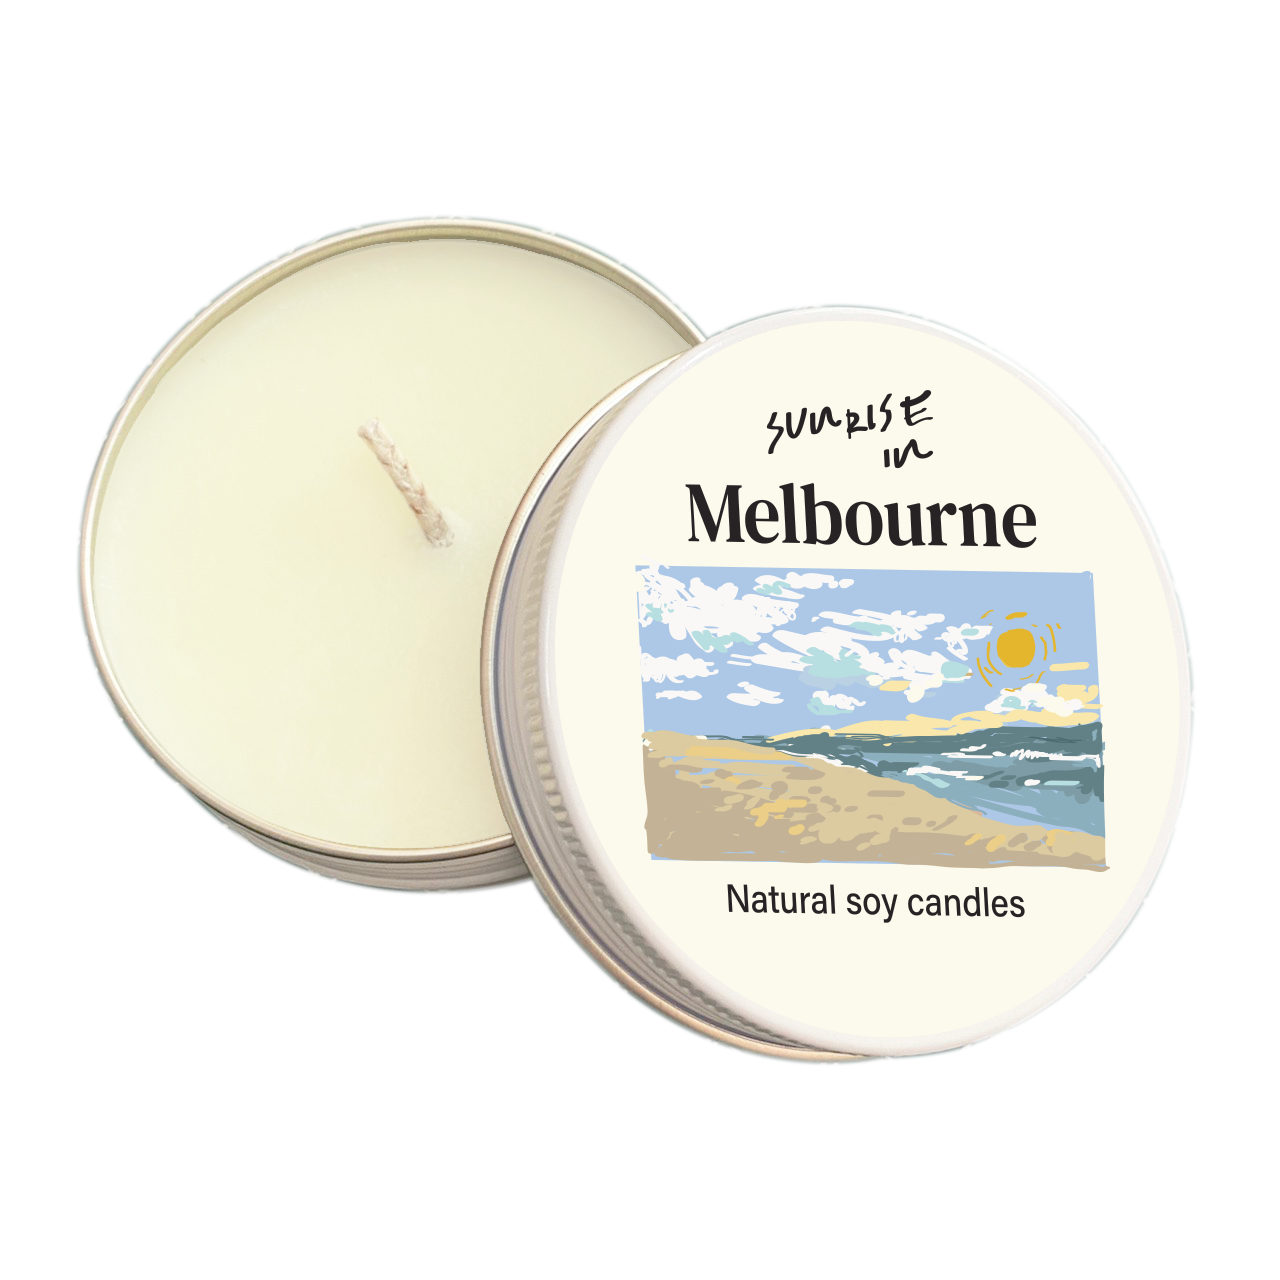 Sunrise in Melbourne soy candles